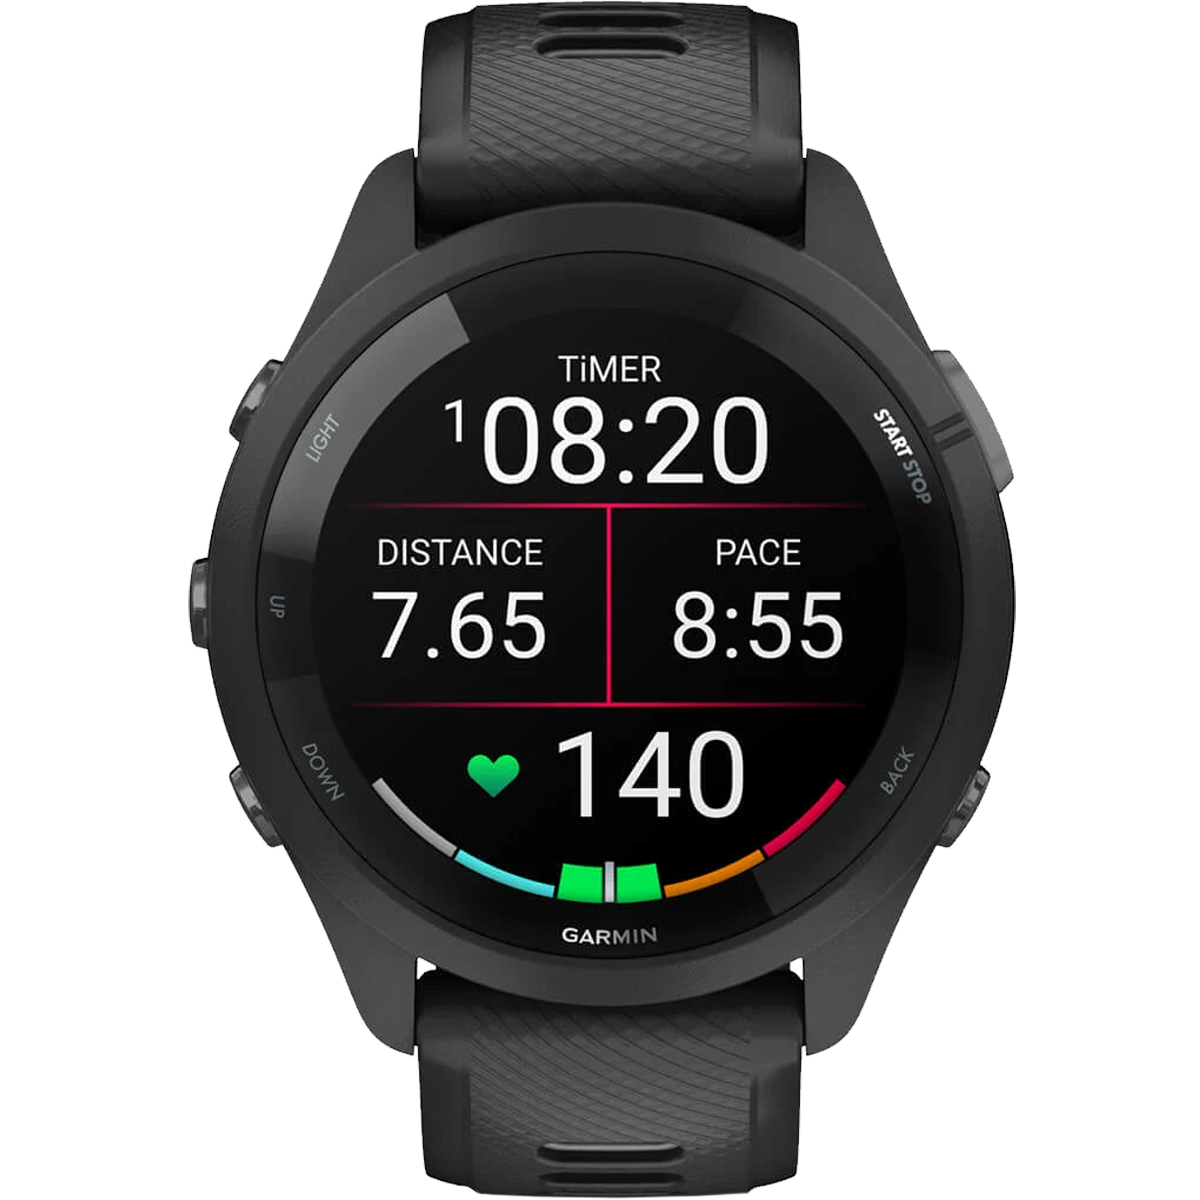 Garmin's feature-packed Forerunner 235 GPS watch is just $140 on